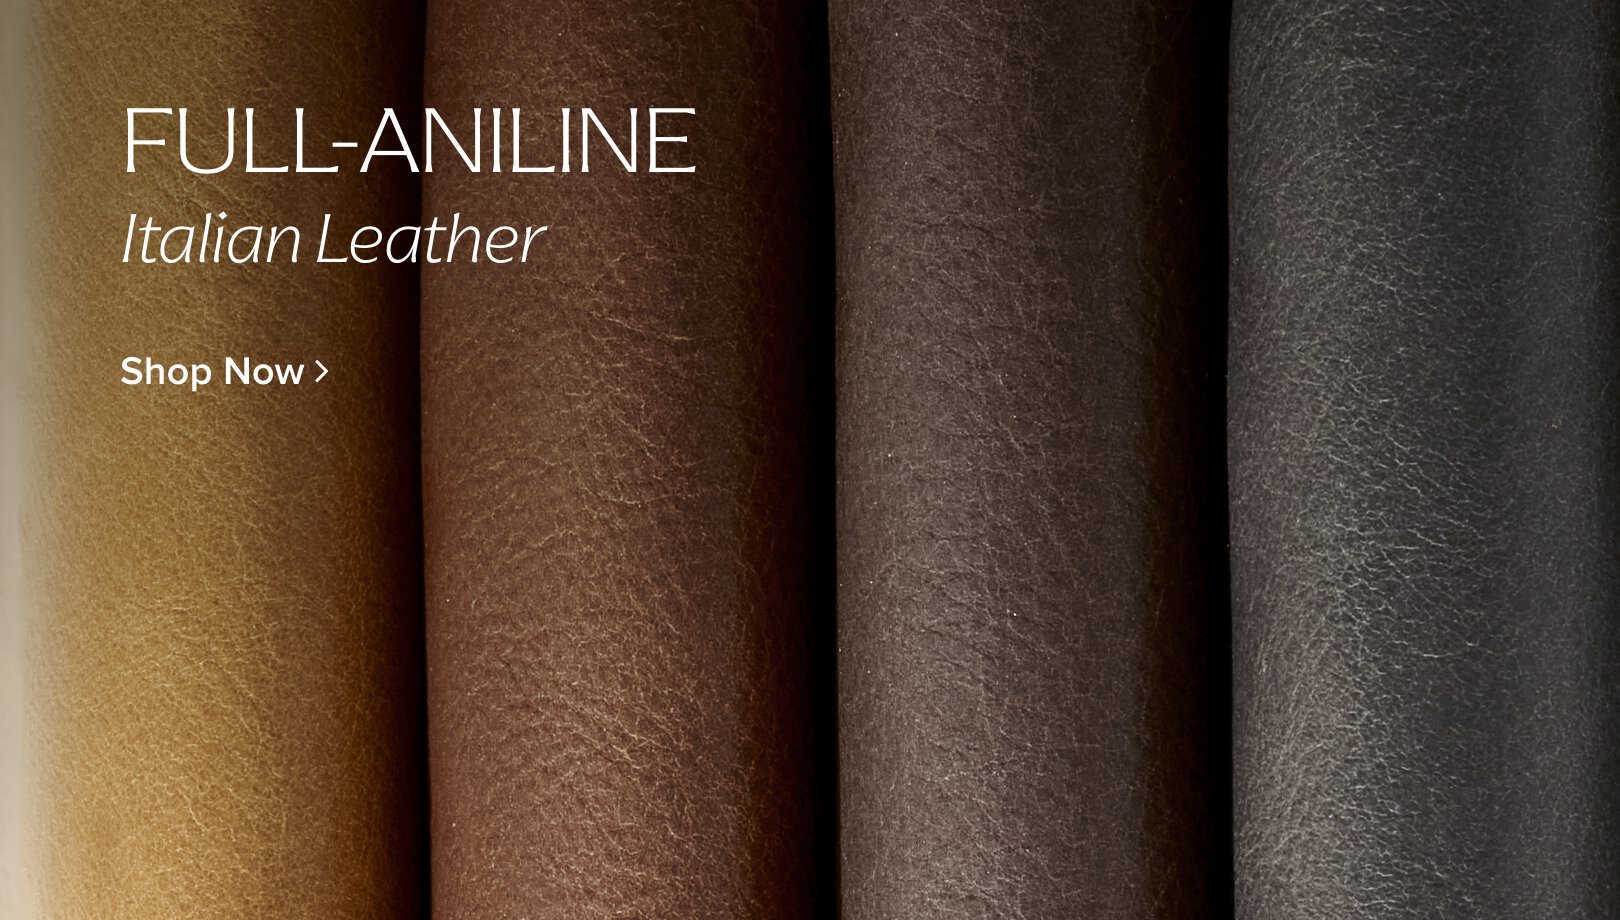 Full-Analine Italian Leather Shop Now>